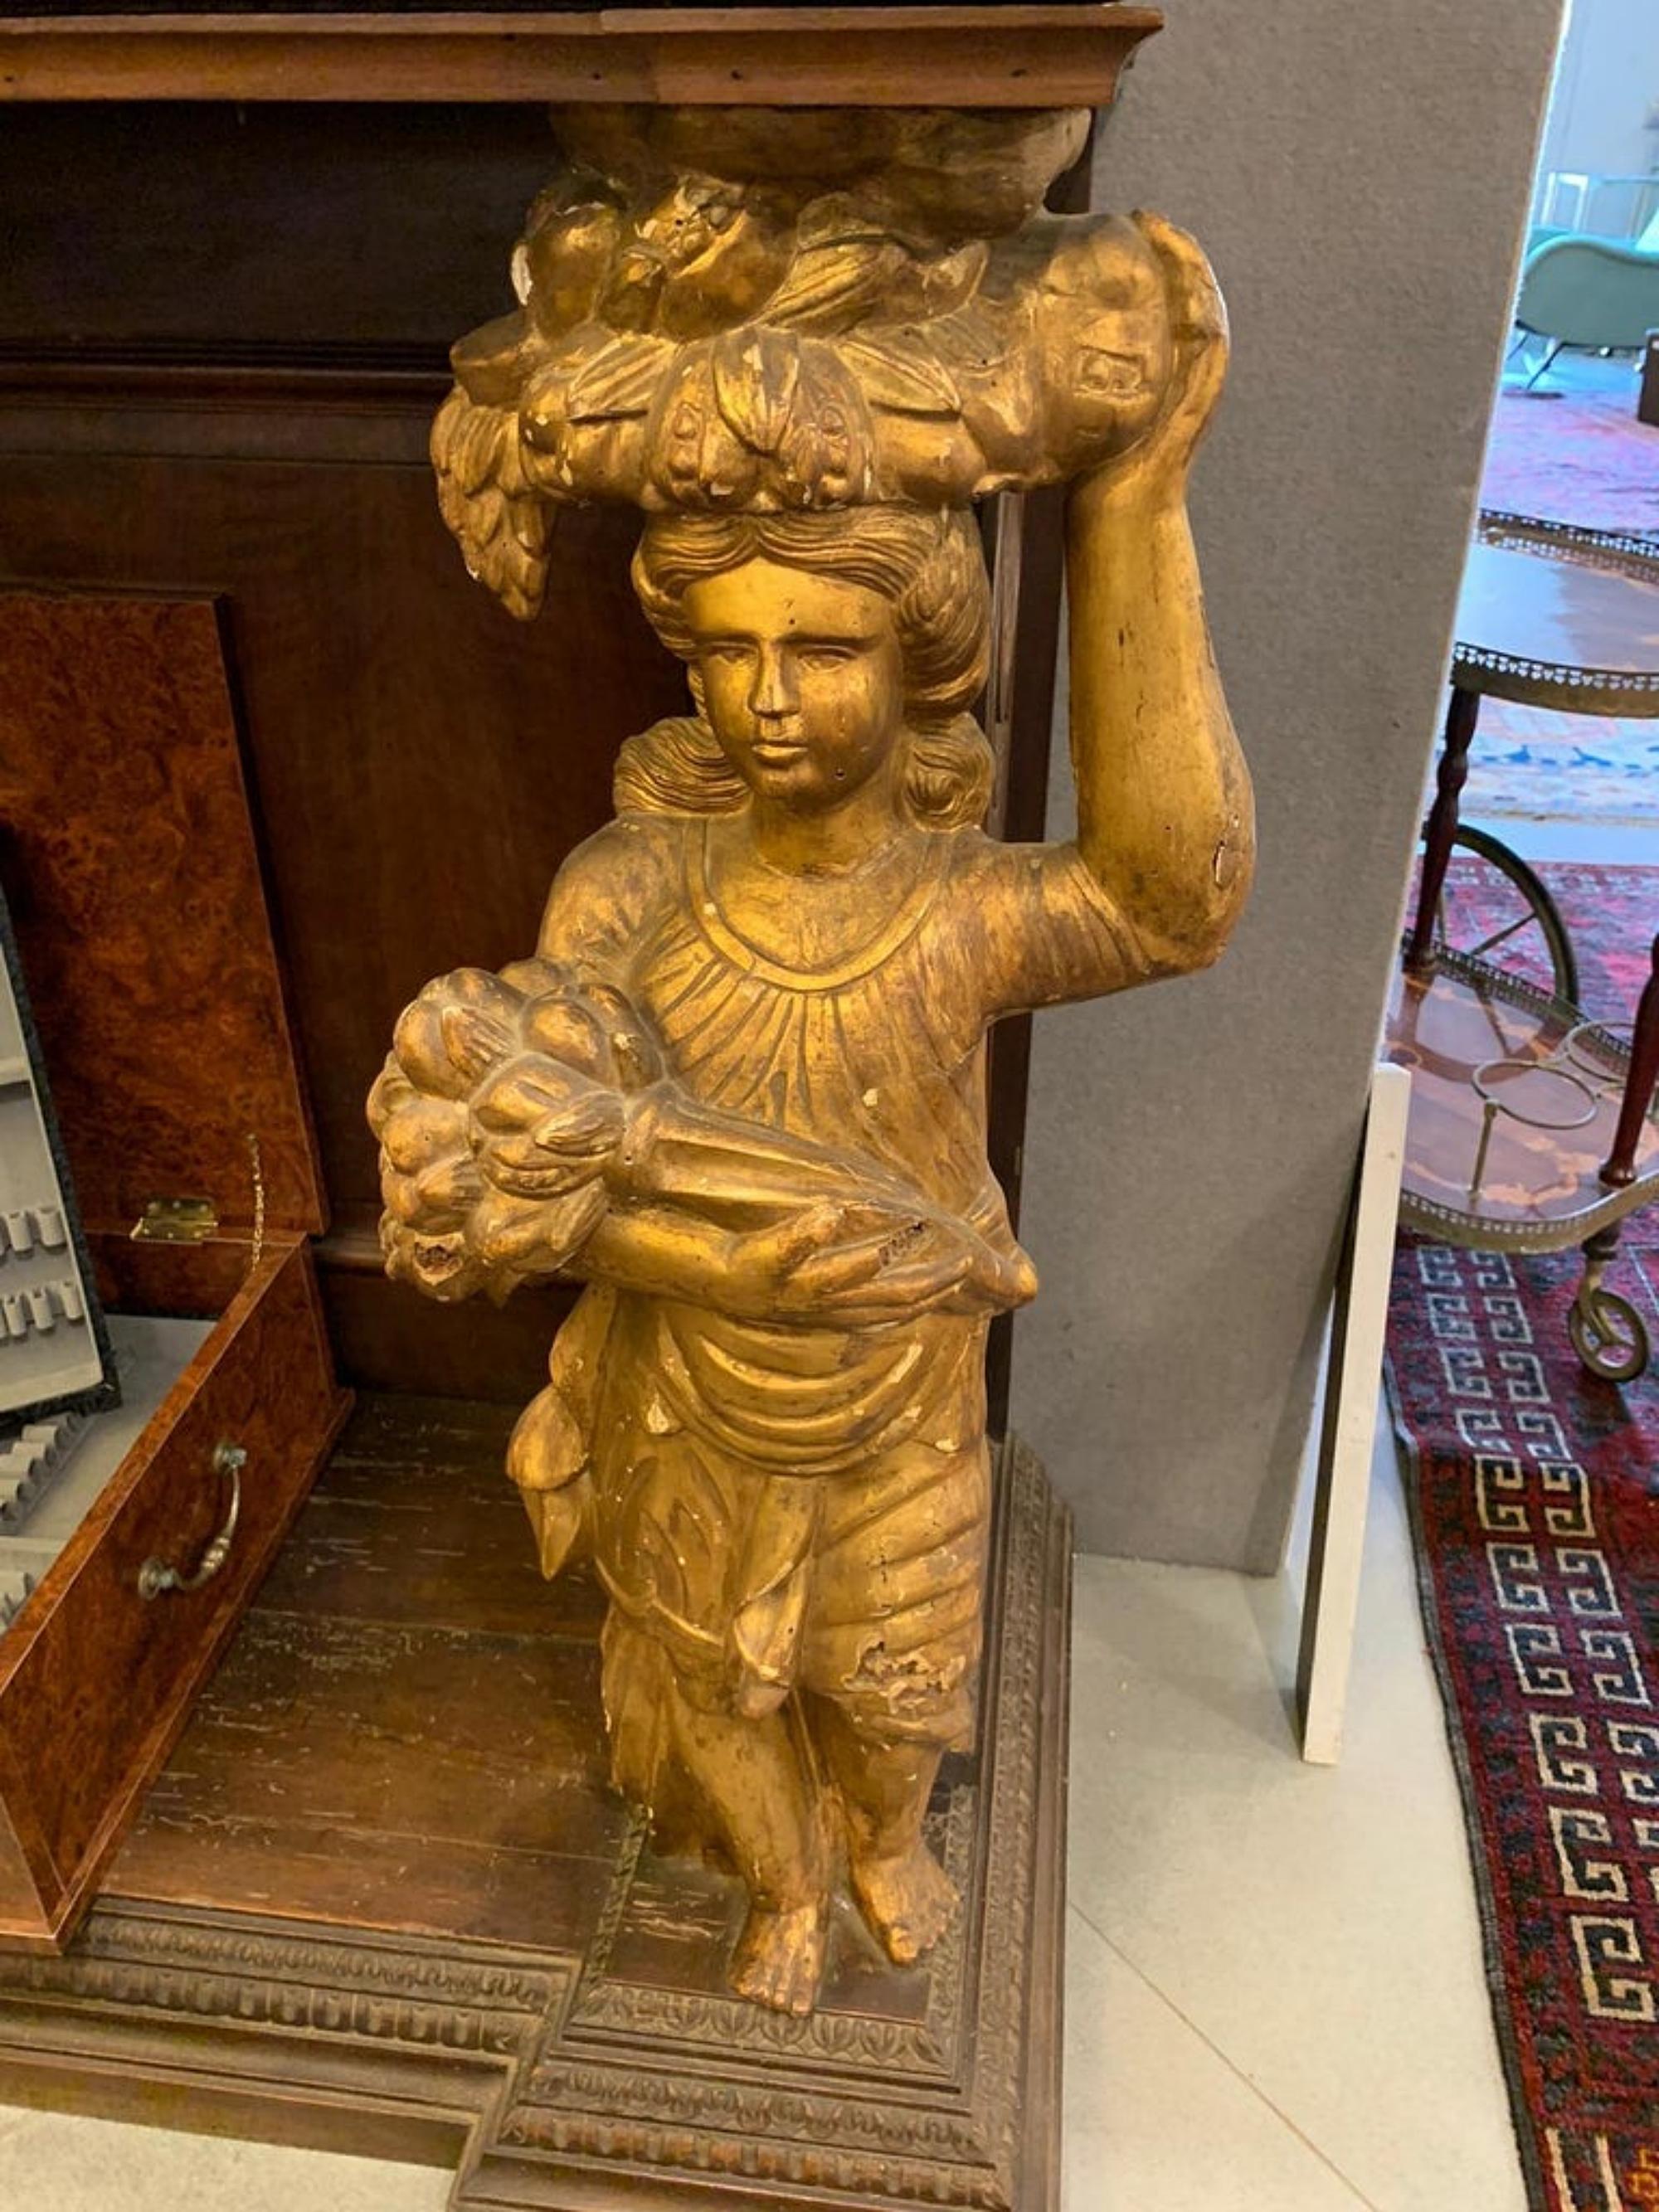 19th Century SICILIAN CABINETWORKING Double body cabinet
Italy  - Sicily
Double-body Renaissance piece of furniture in walnut wood, richly carved with golden caryatids at the base and putto in the upper body and two pine cones in gilded wood.

173 x